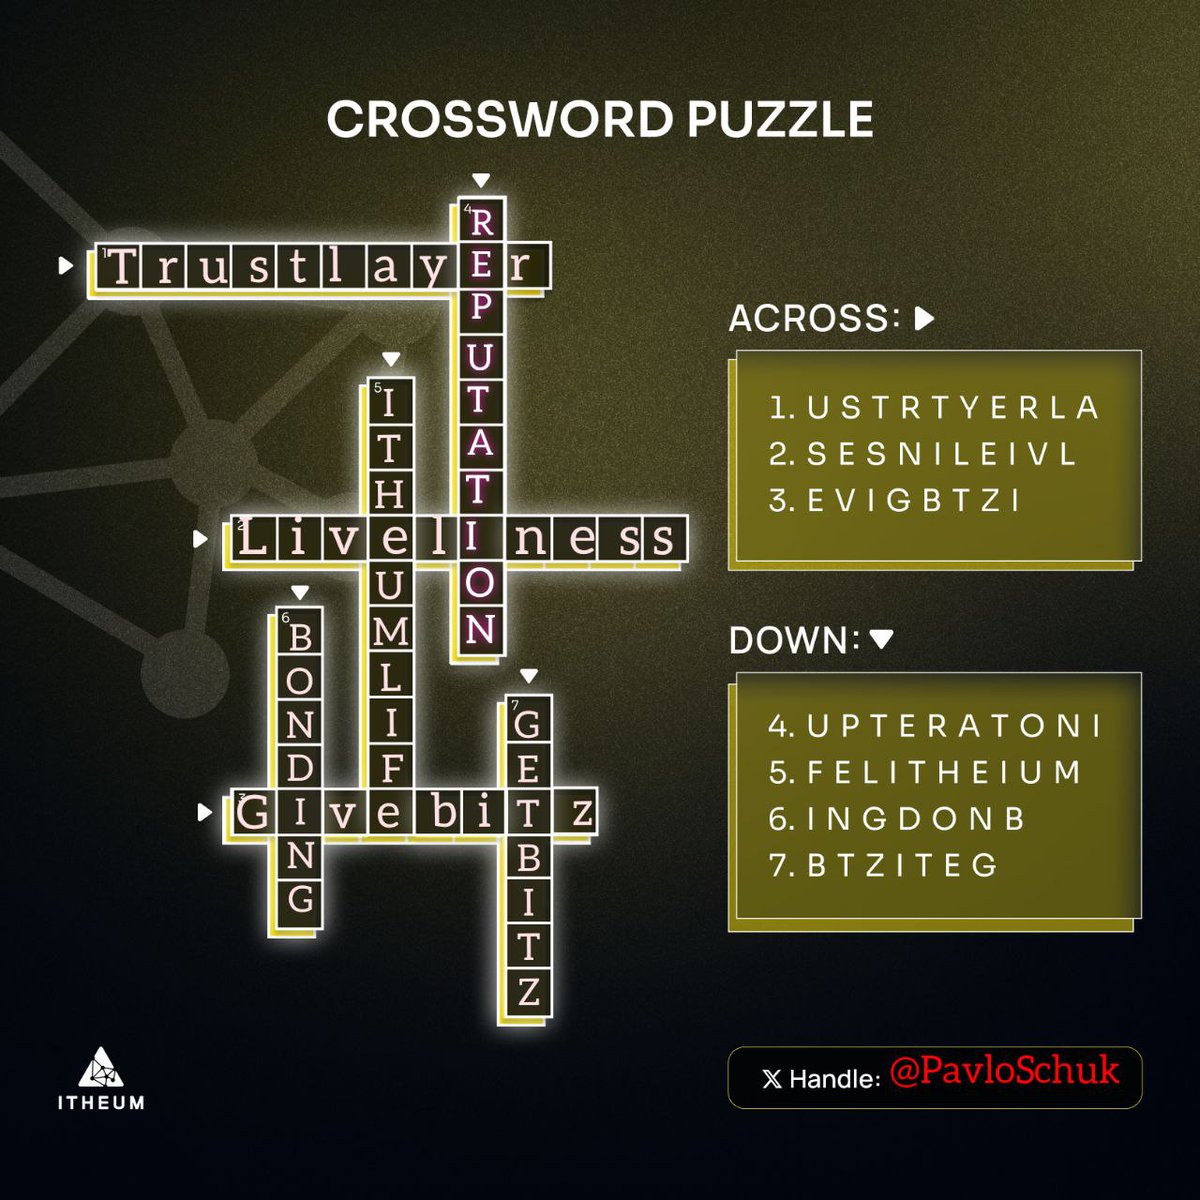 I quickly finished the crossword puzzle. But for a new @Itheum Trailblazer Quest 10 member, it may not be so easy. Join @ItheumCommunity to easily get used to the project. Collect BiTz drops, this will increase your #Ith4umLife #DataNFTsreward #Itheum